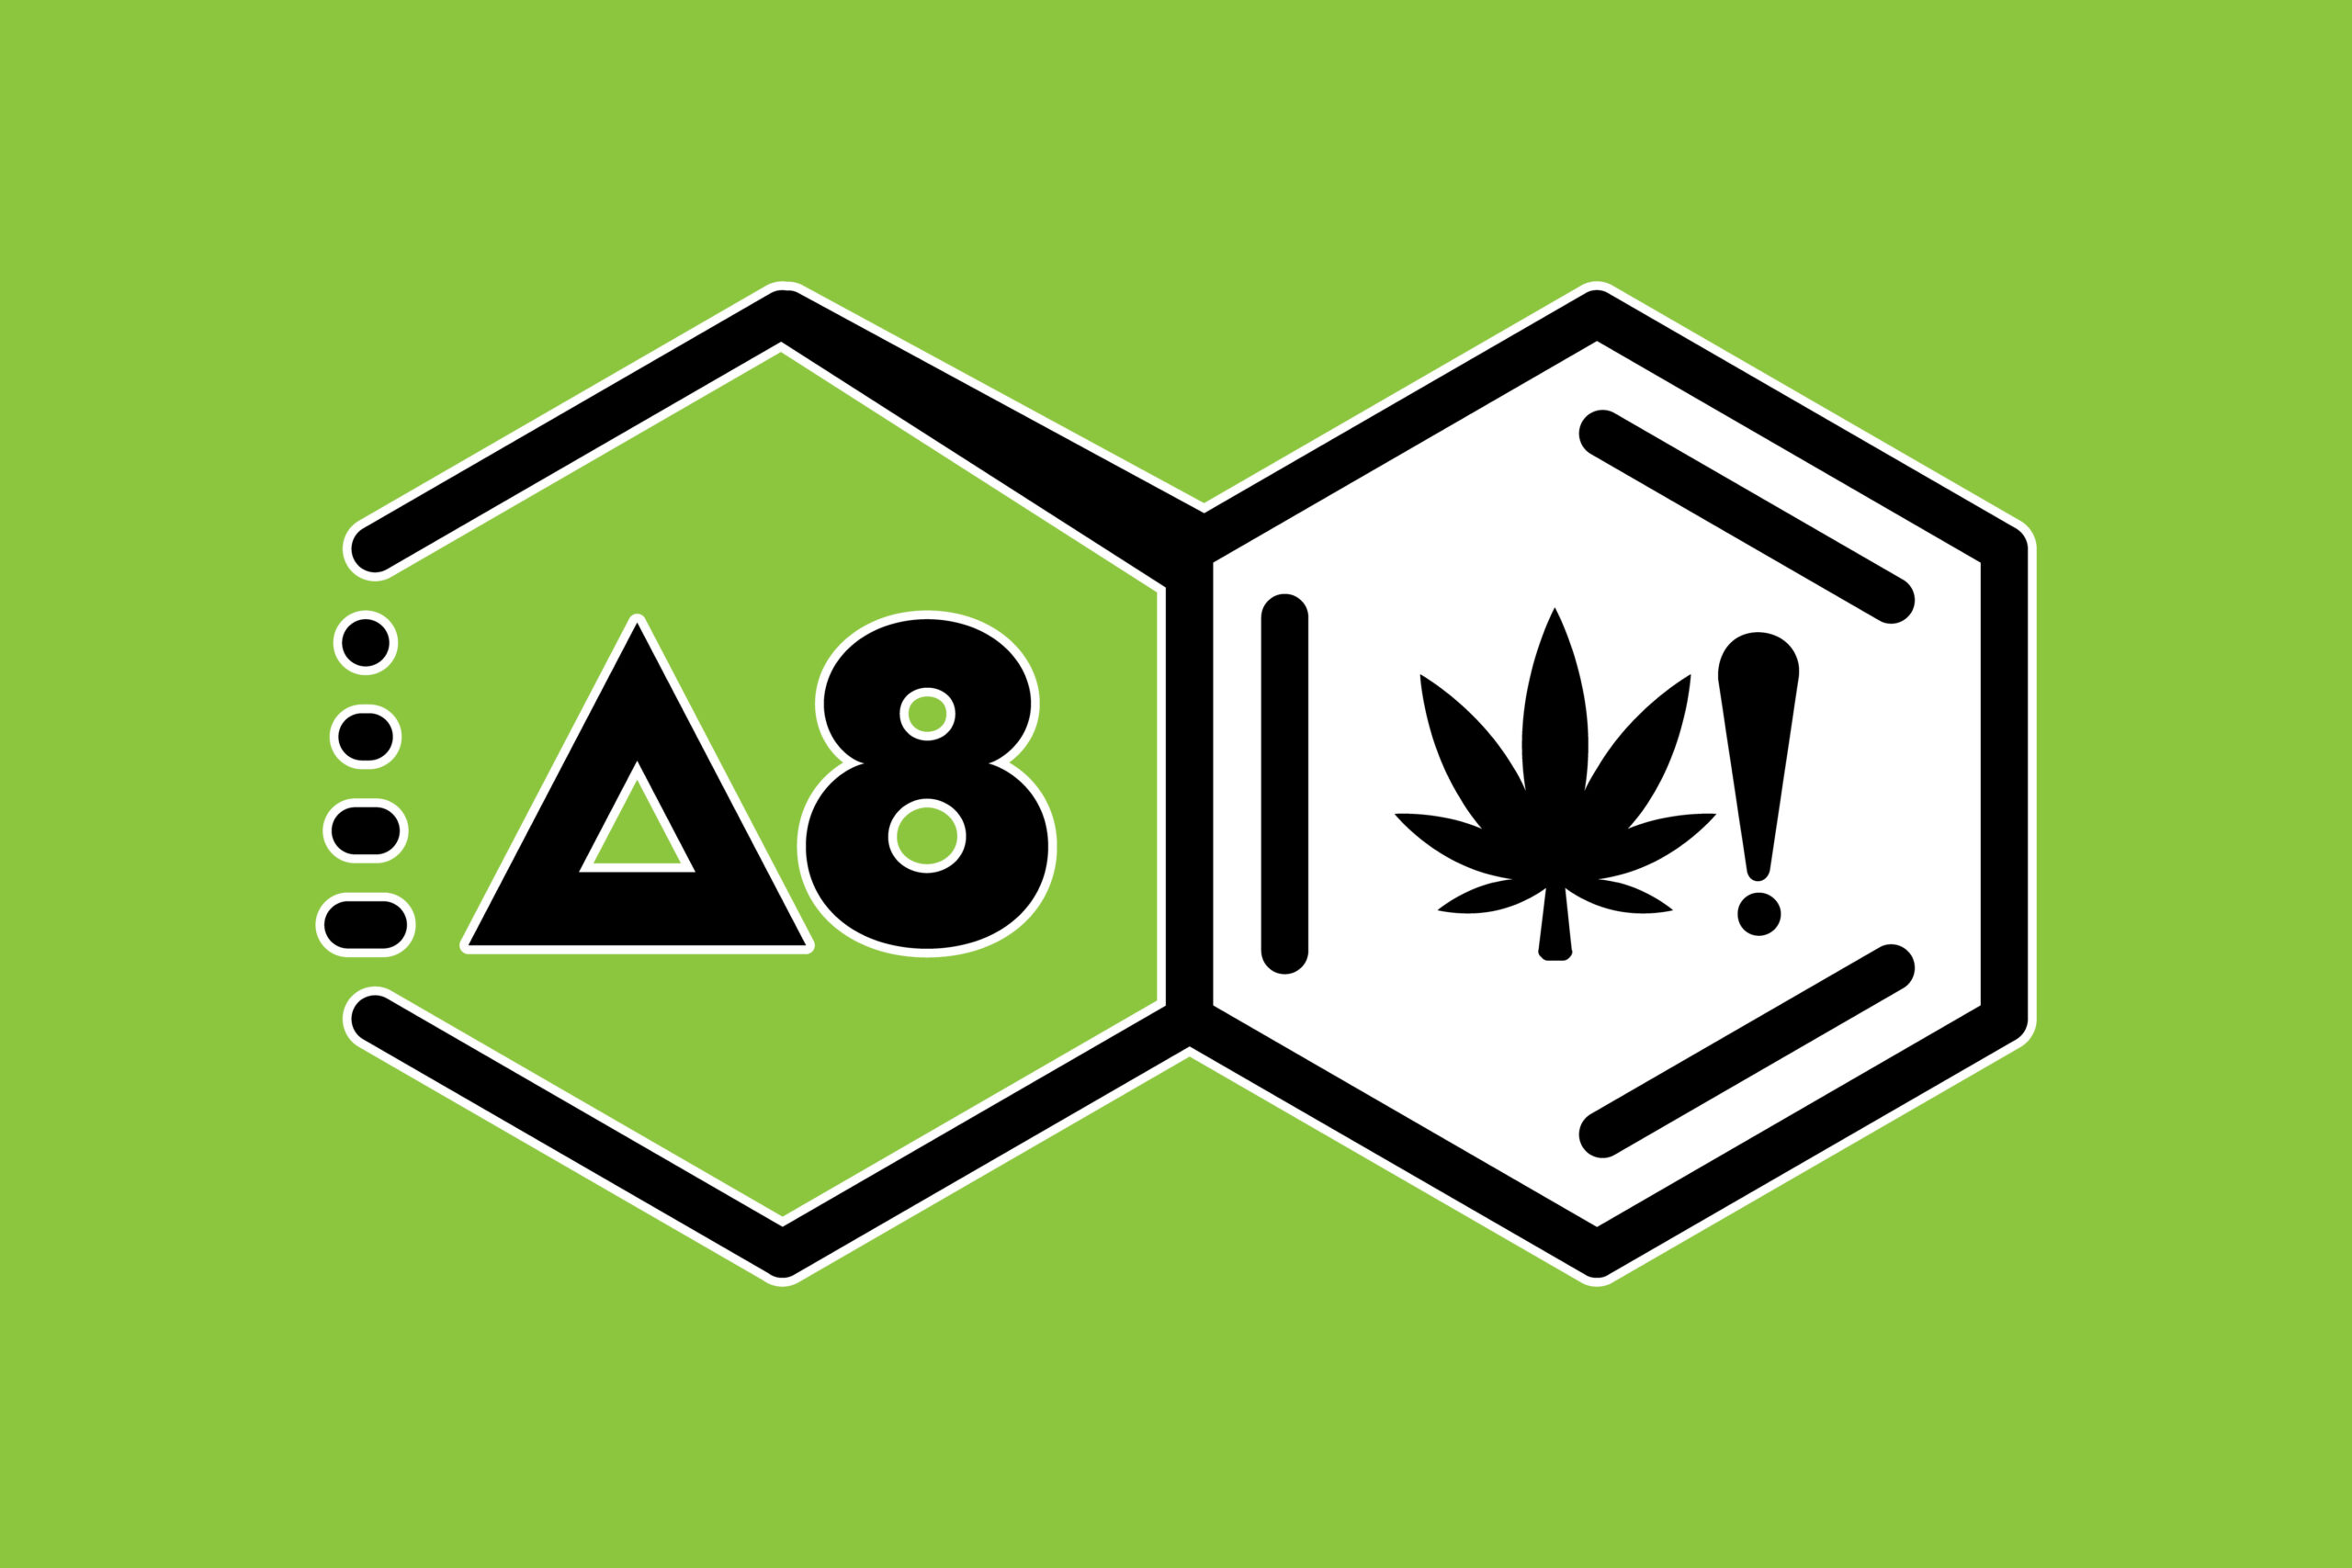 D8, Eh? What Canadians need to know about Delta-8 cannabis products